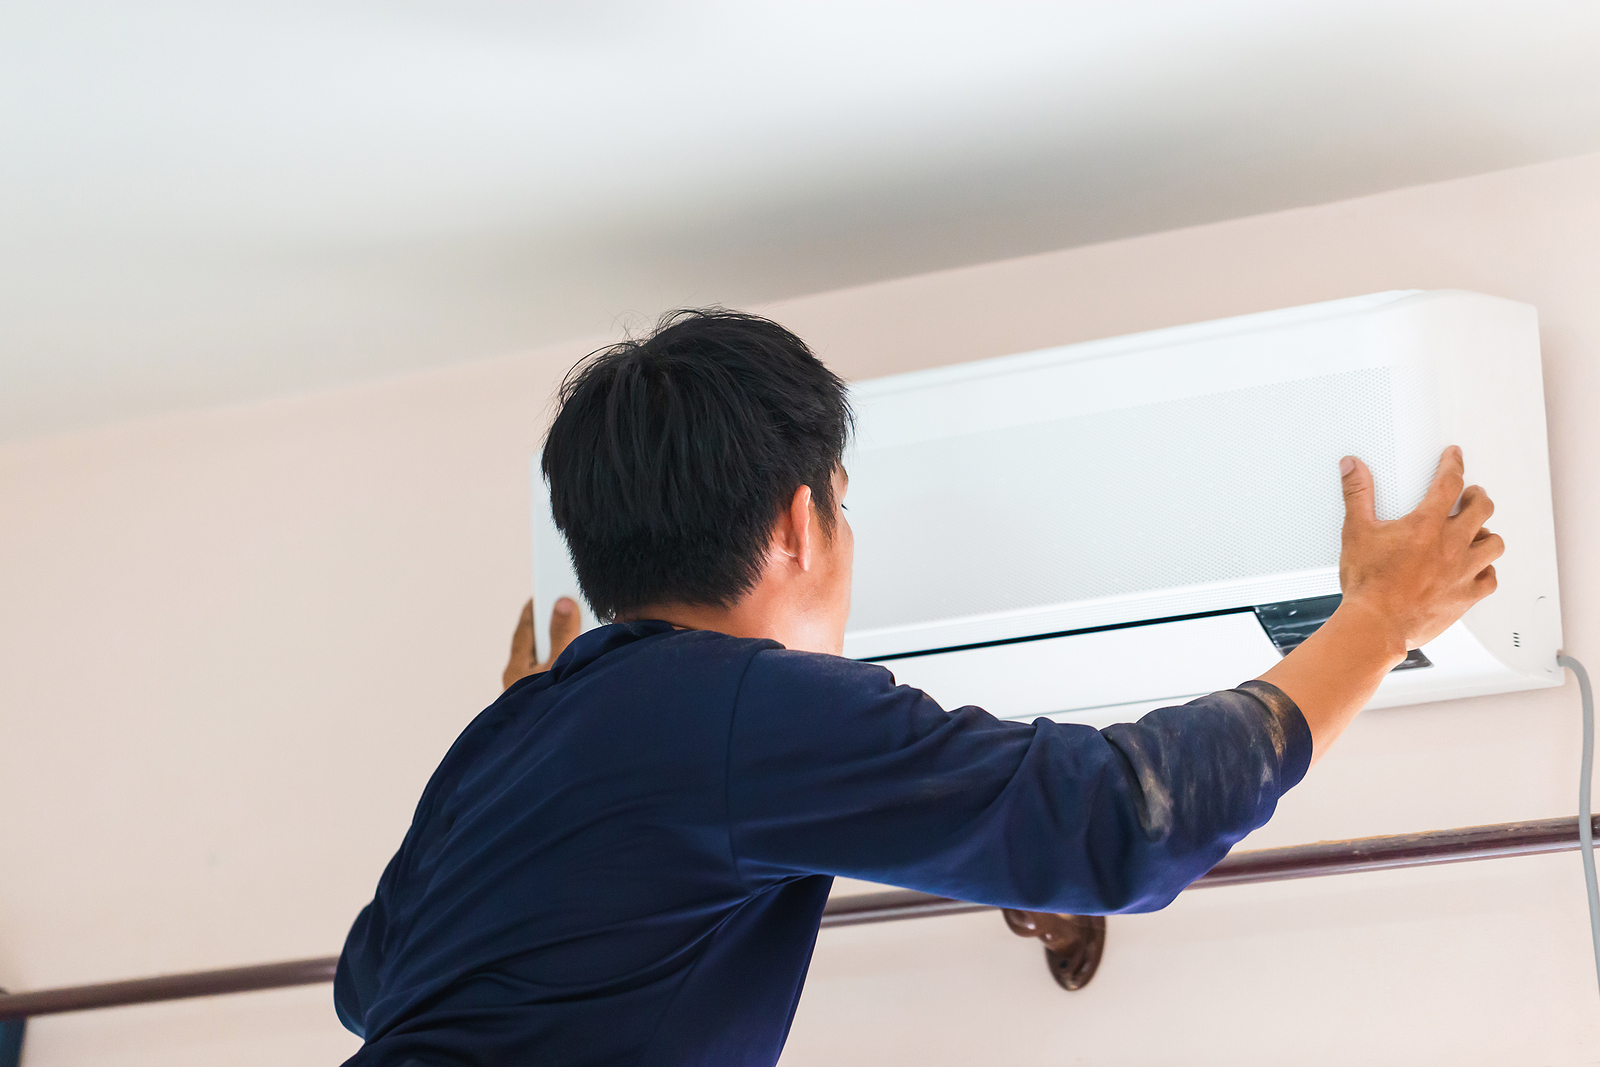 Common AC Repair Issues And How to Diagnose Them: A Homeowner's Guide